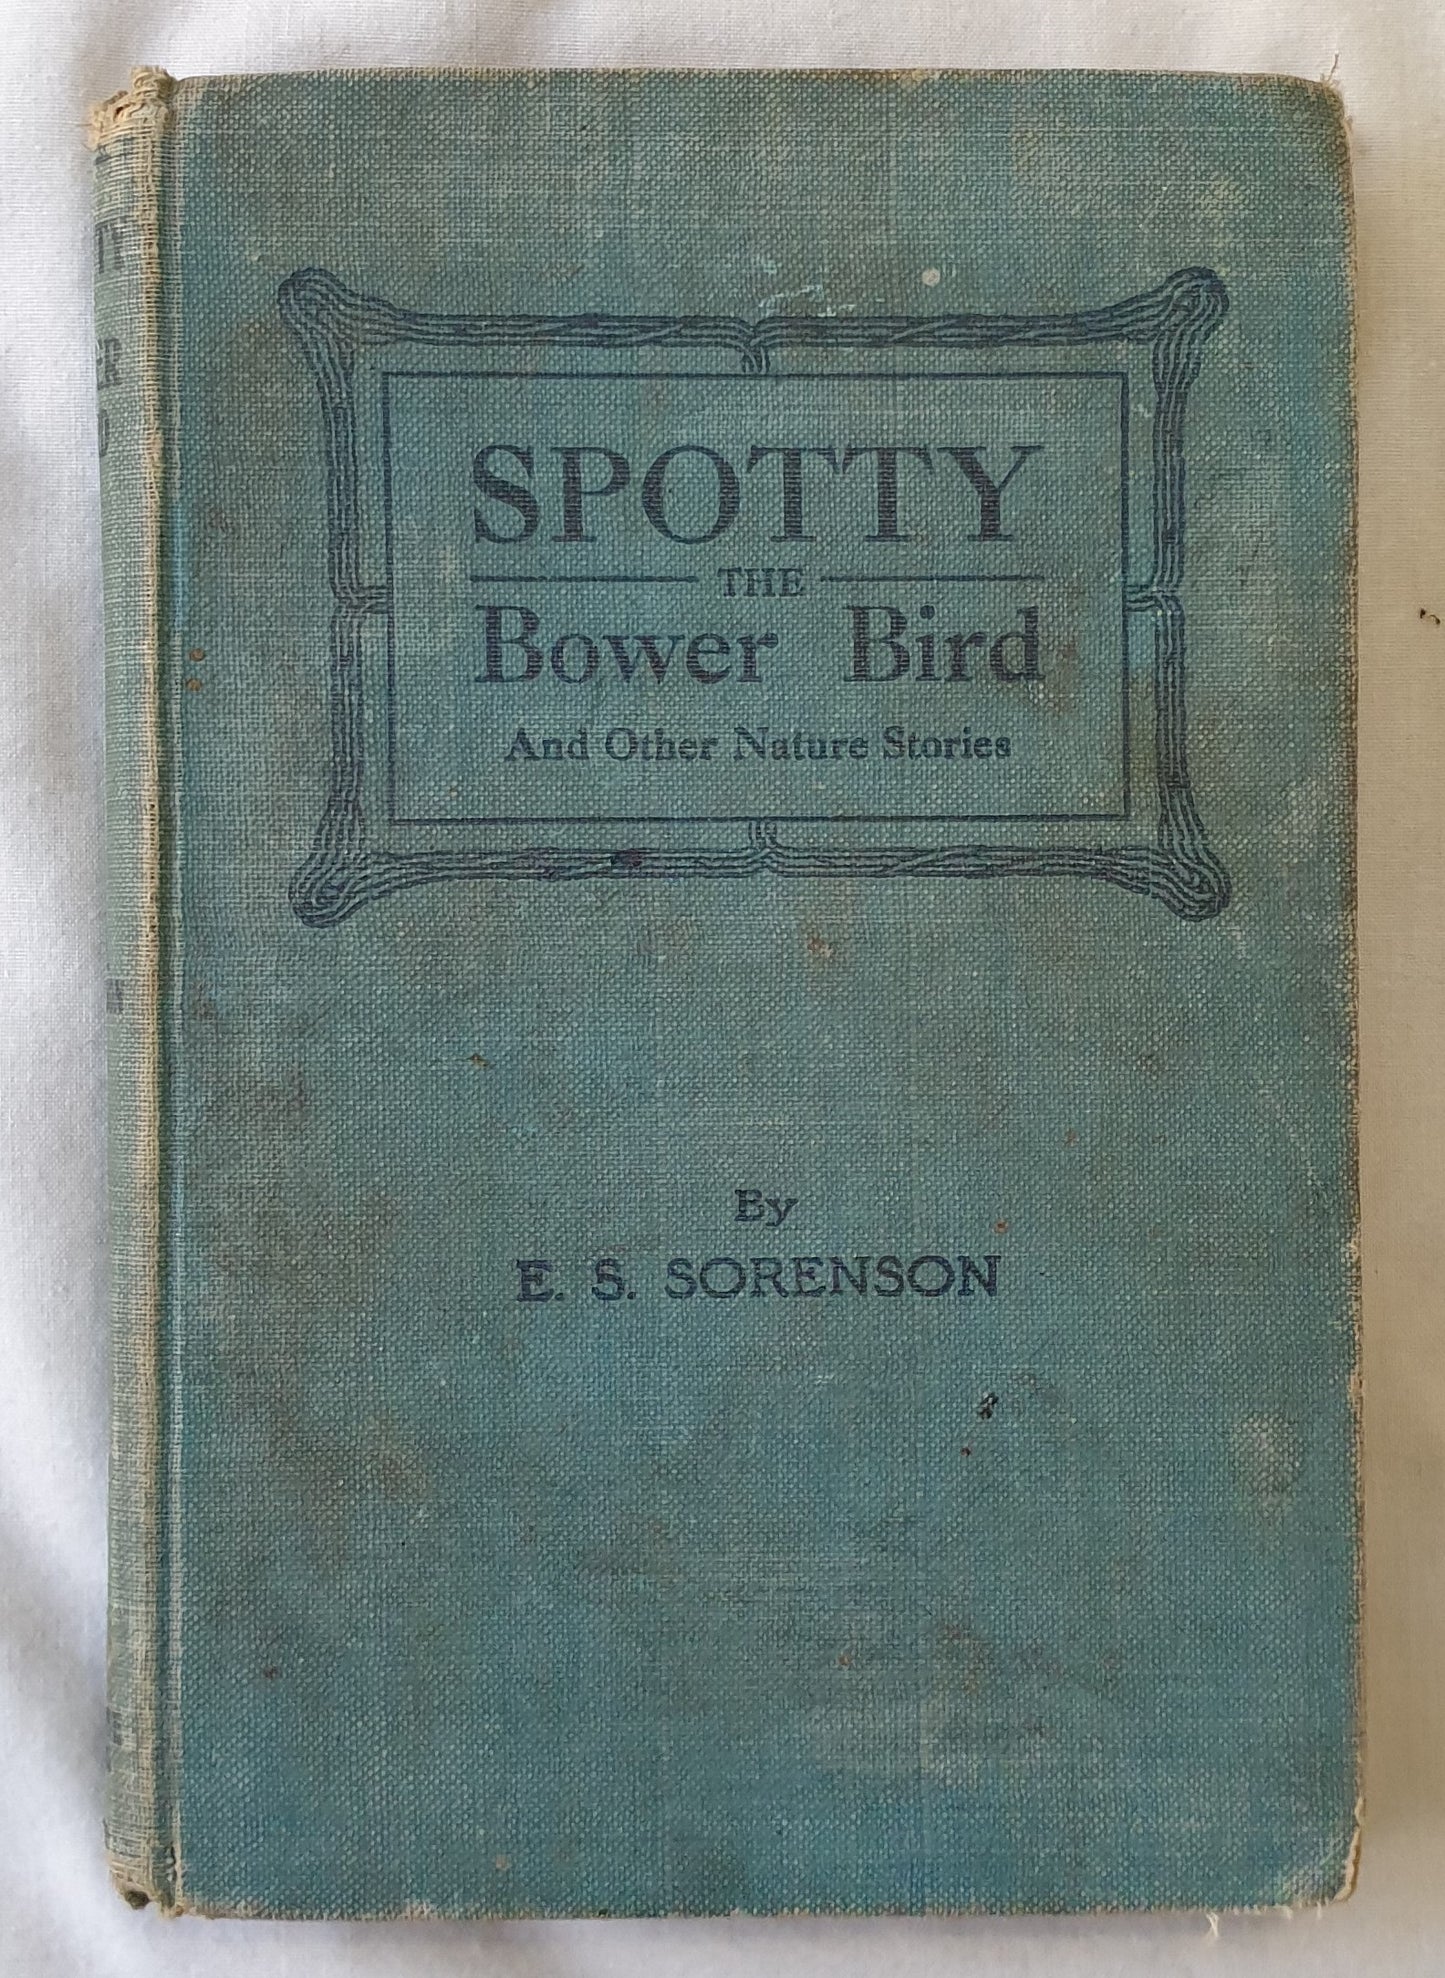 Spotty, the Bower Bird  And Other Nature Stories  by Edward S. Sorenson  illustrations by Ernest E. Barker